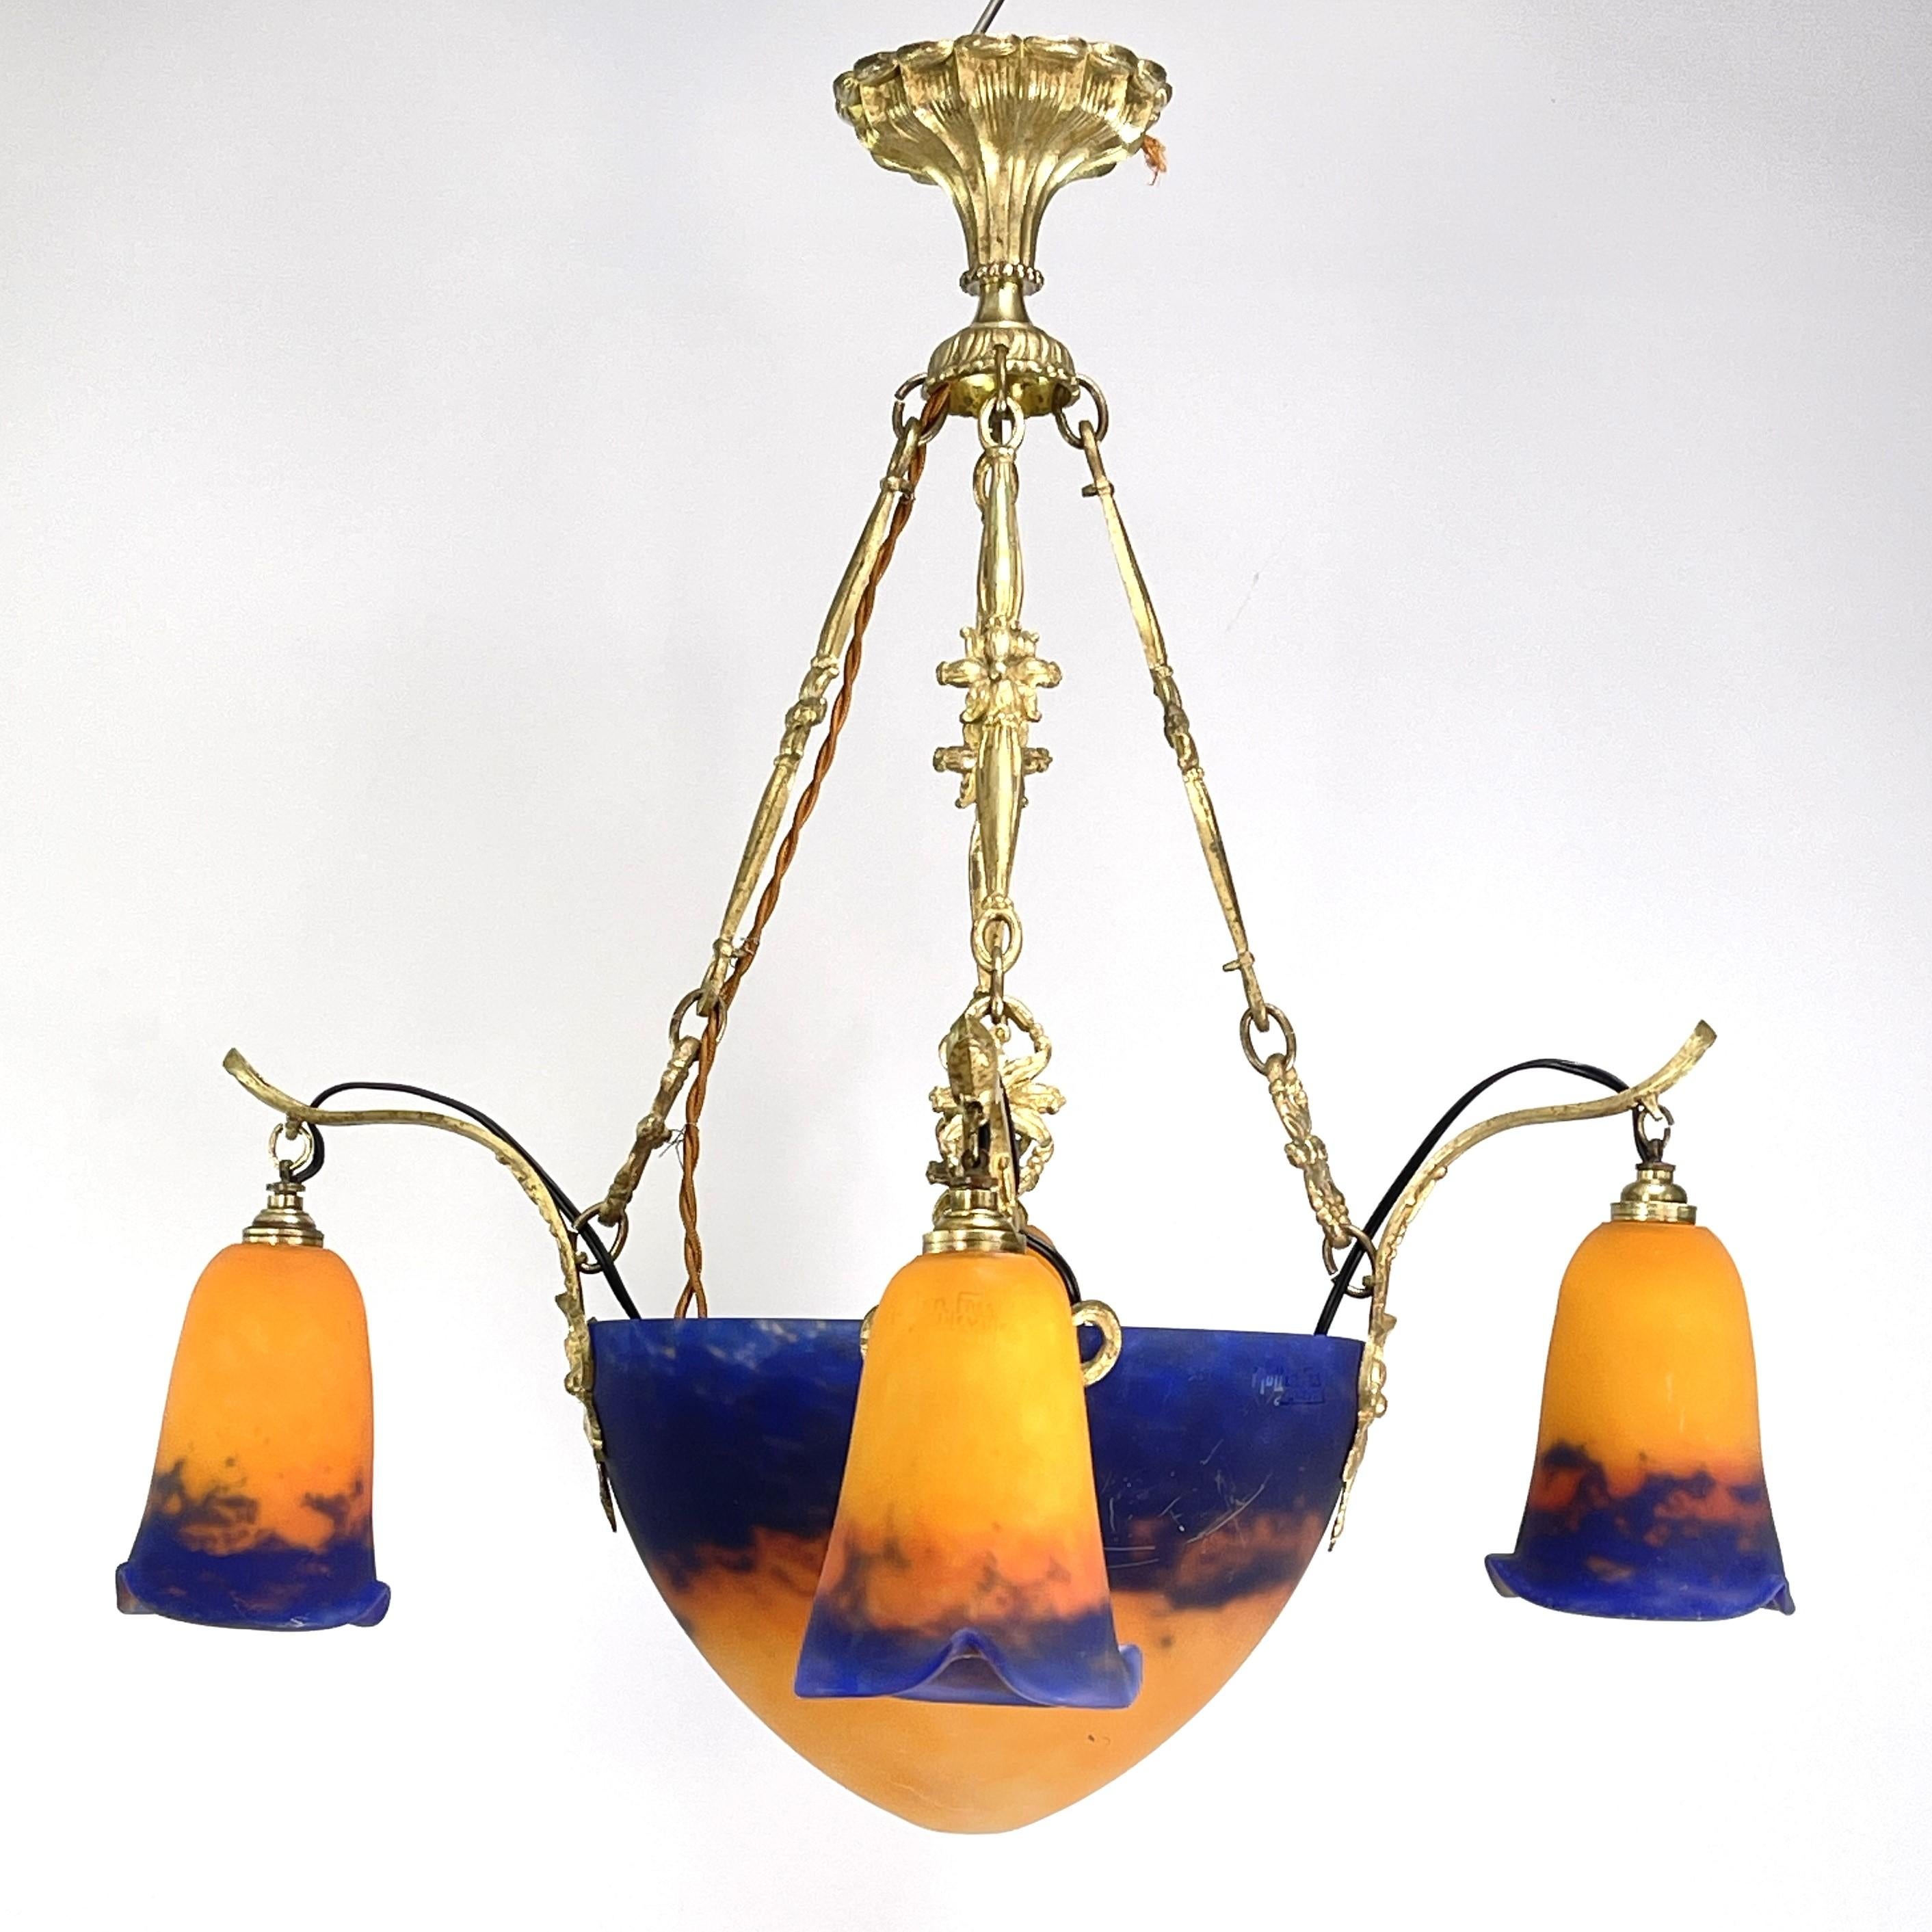 ART DECO ceiling lamp, signed Muller Freres an Atelier  Petitot

The ART DECO ceiling lamp is a remarkable example of the craftsmanship and style of the early 20th century. 

The signature 